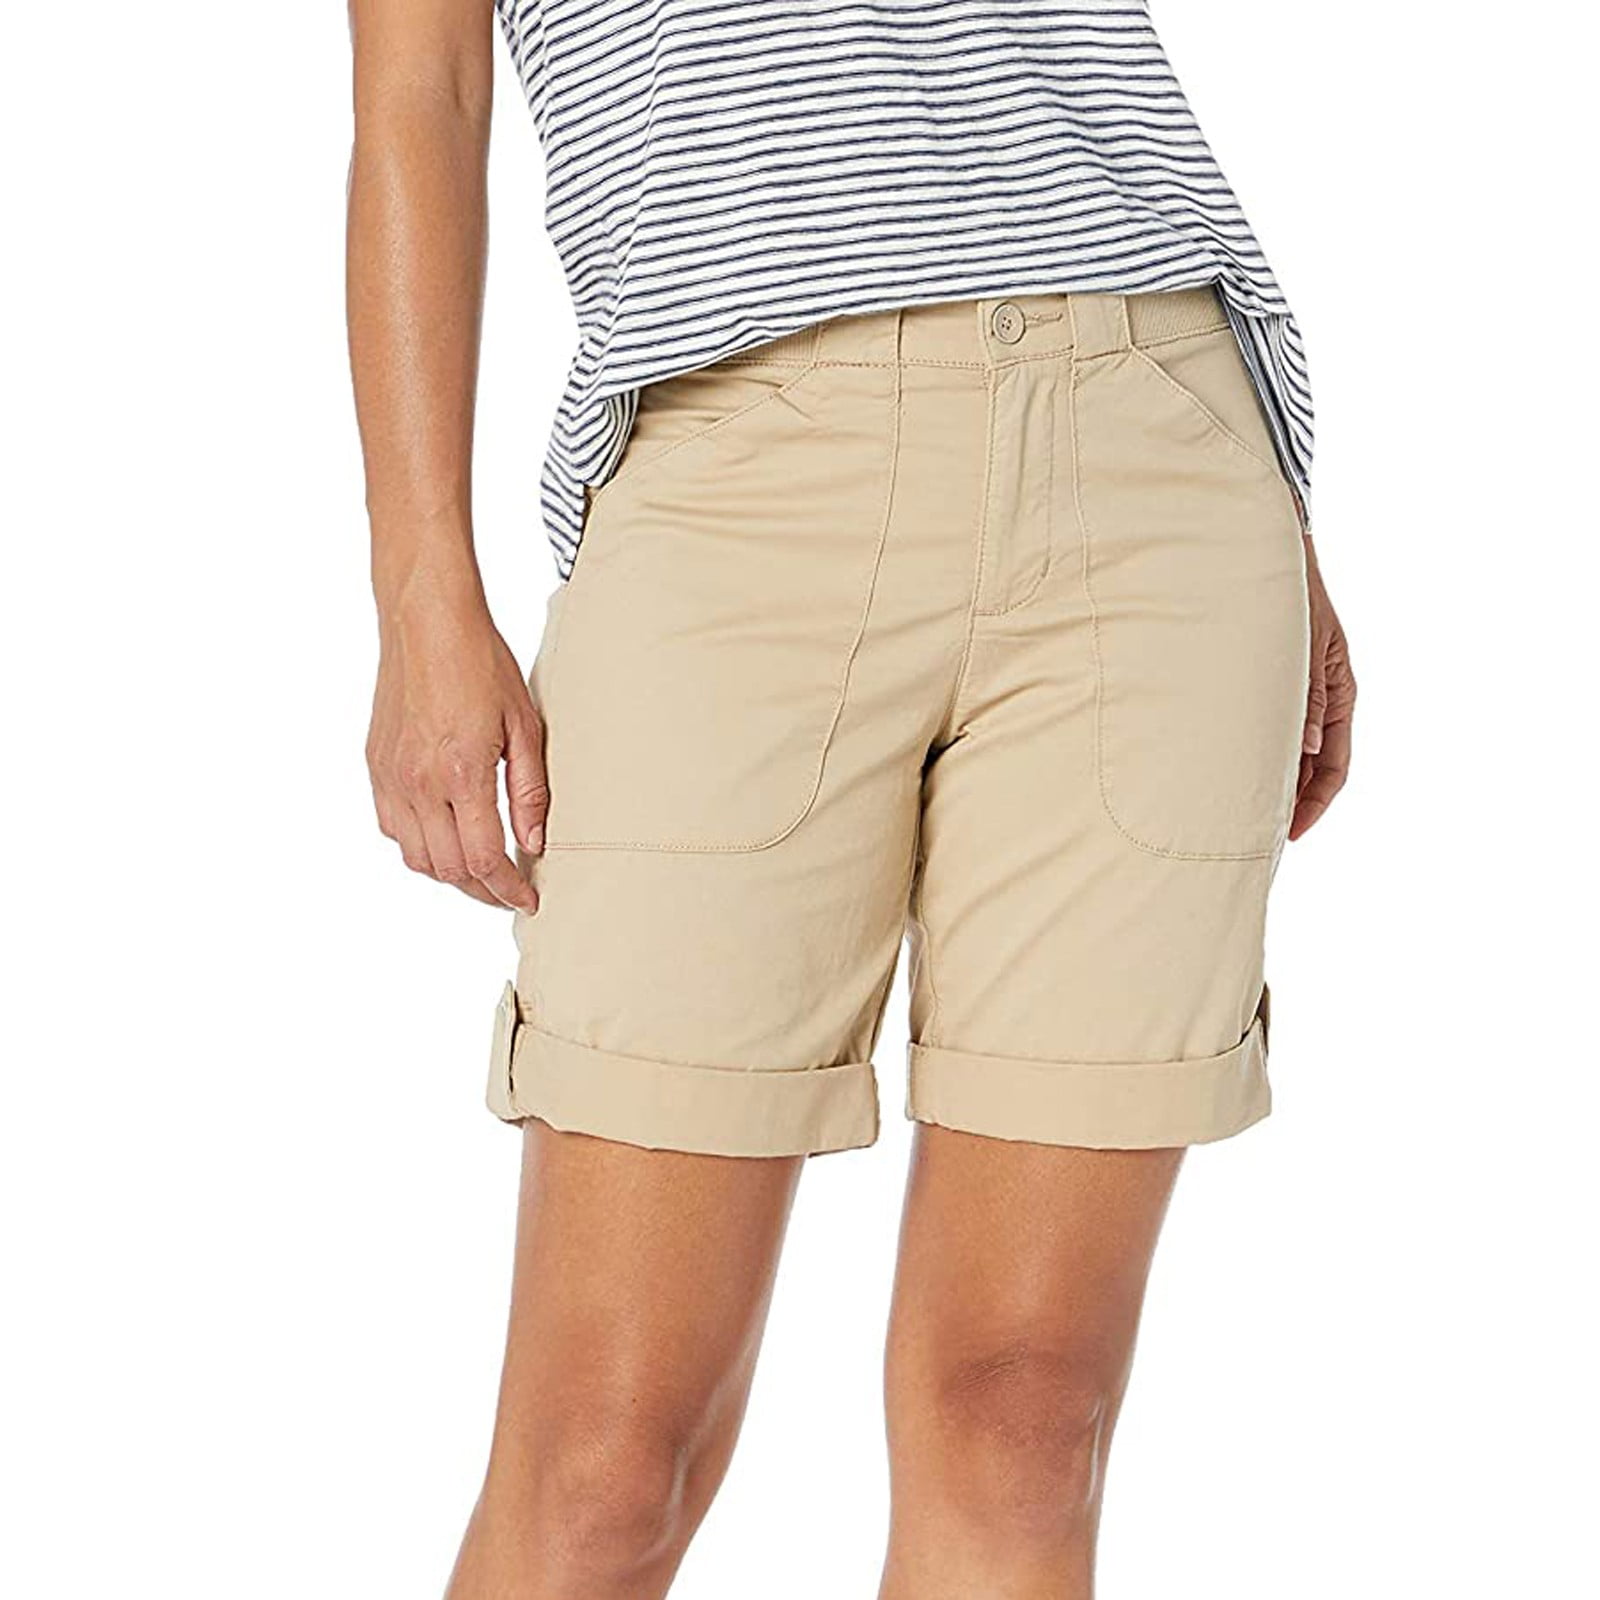 Women's Casual Low Waist Cargo Shorts with Pockets for Spring and Summer